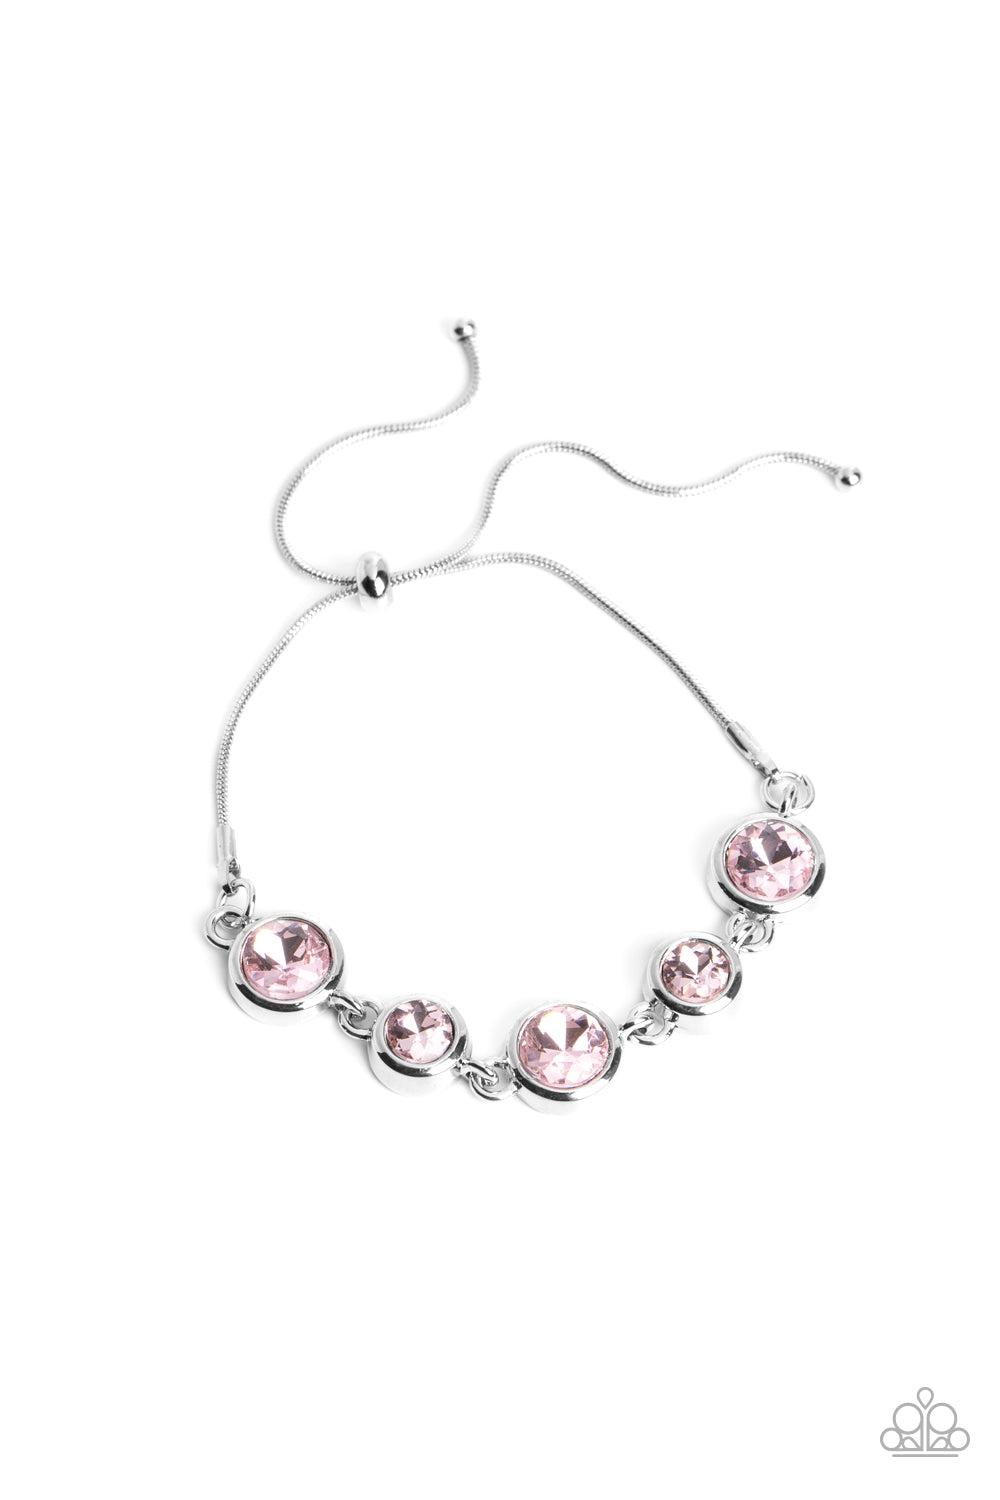 Classically Cultivated Pink Rhinestone Bracelet - Paparazzi Accessories- lightbox - CarasShop.com - $5 Jewelry by Cara Jewels